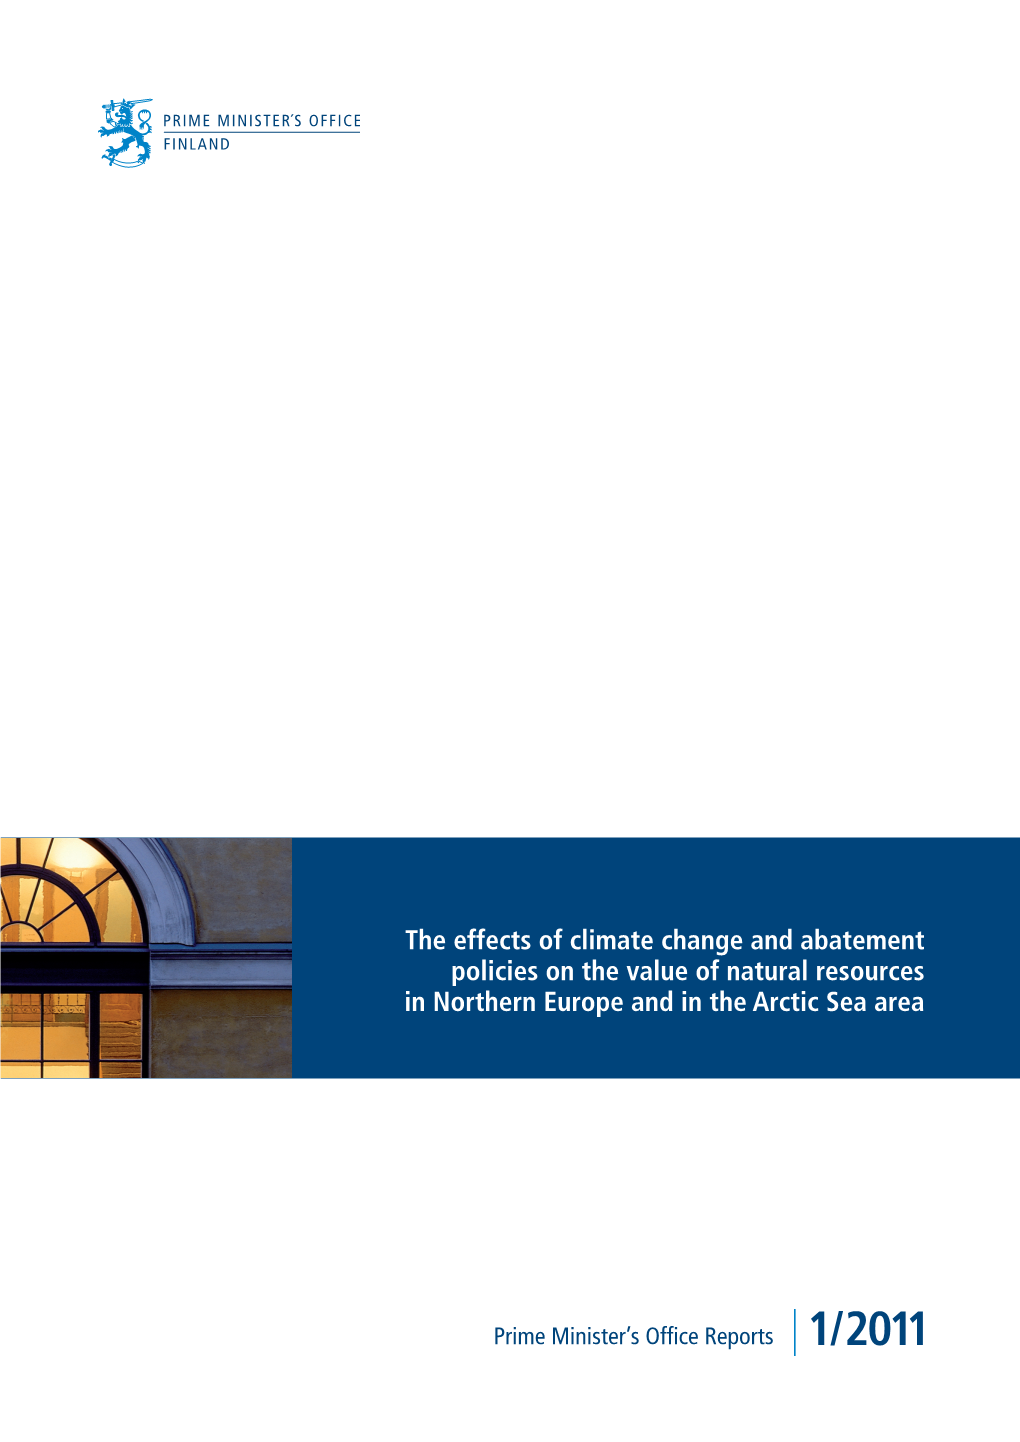 The Effects of Climate Change and Abatement Policies on the Value of Natural Resources in Northern Europe and in the Arctic Sea Area